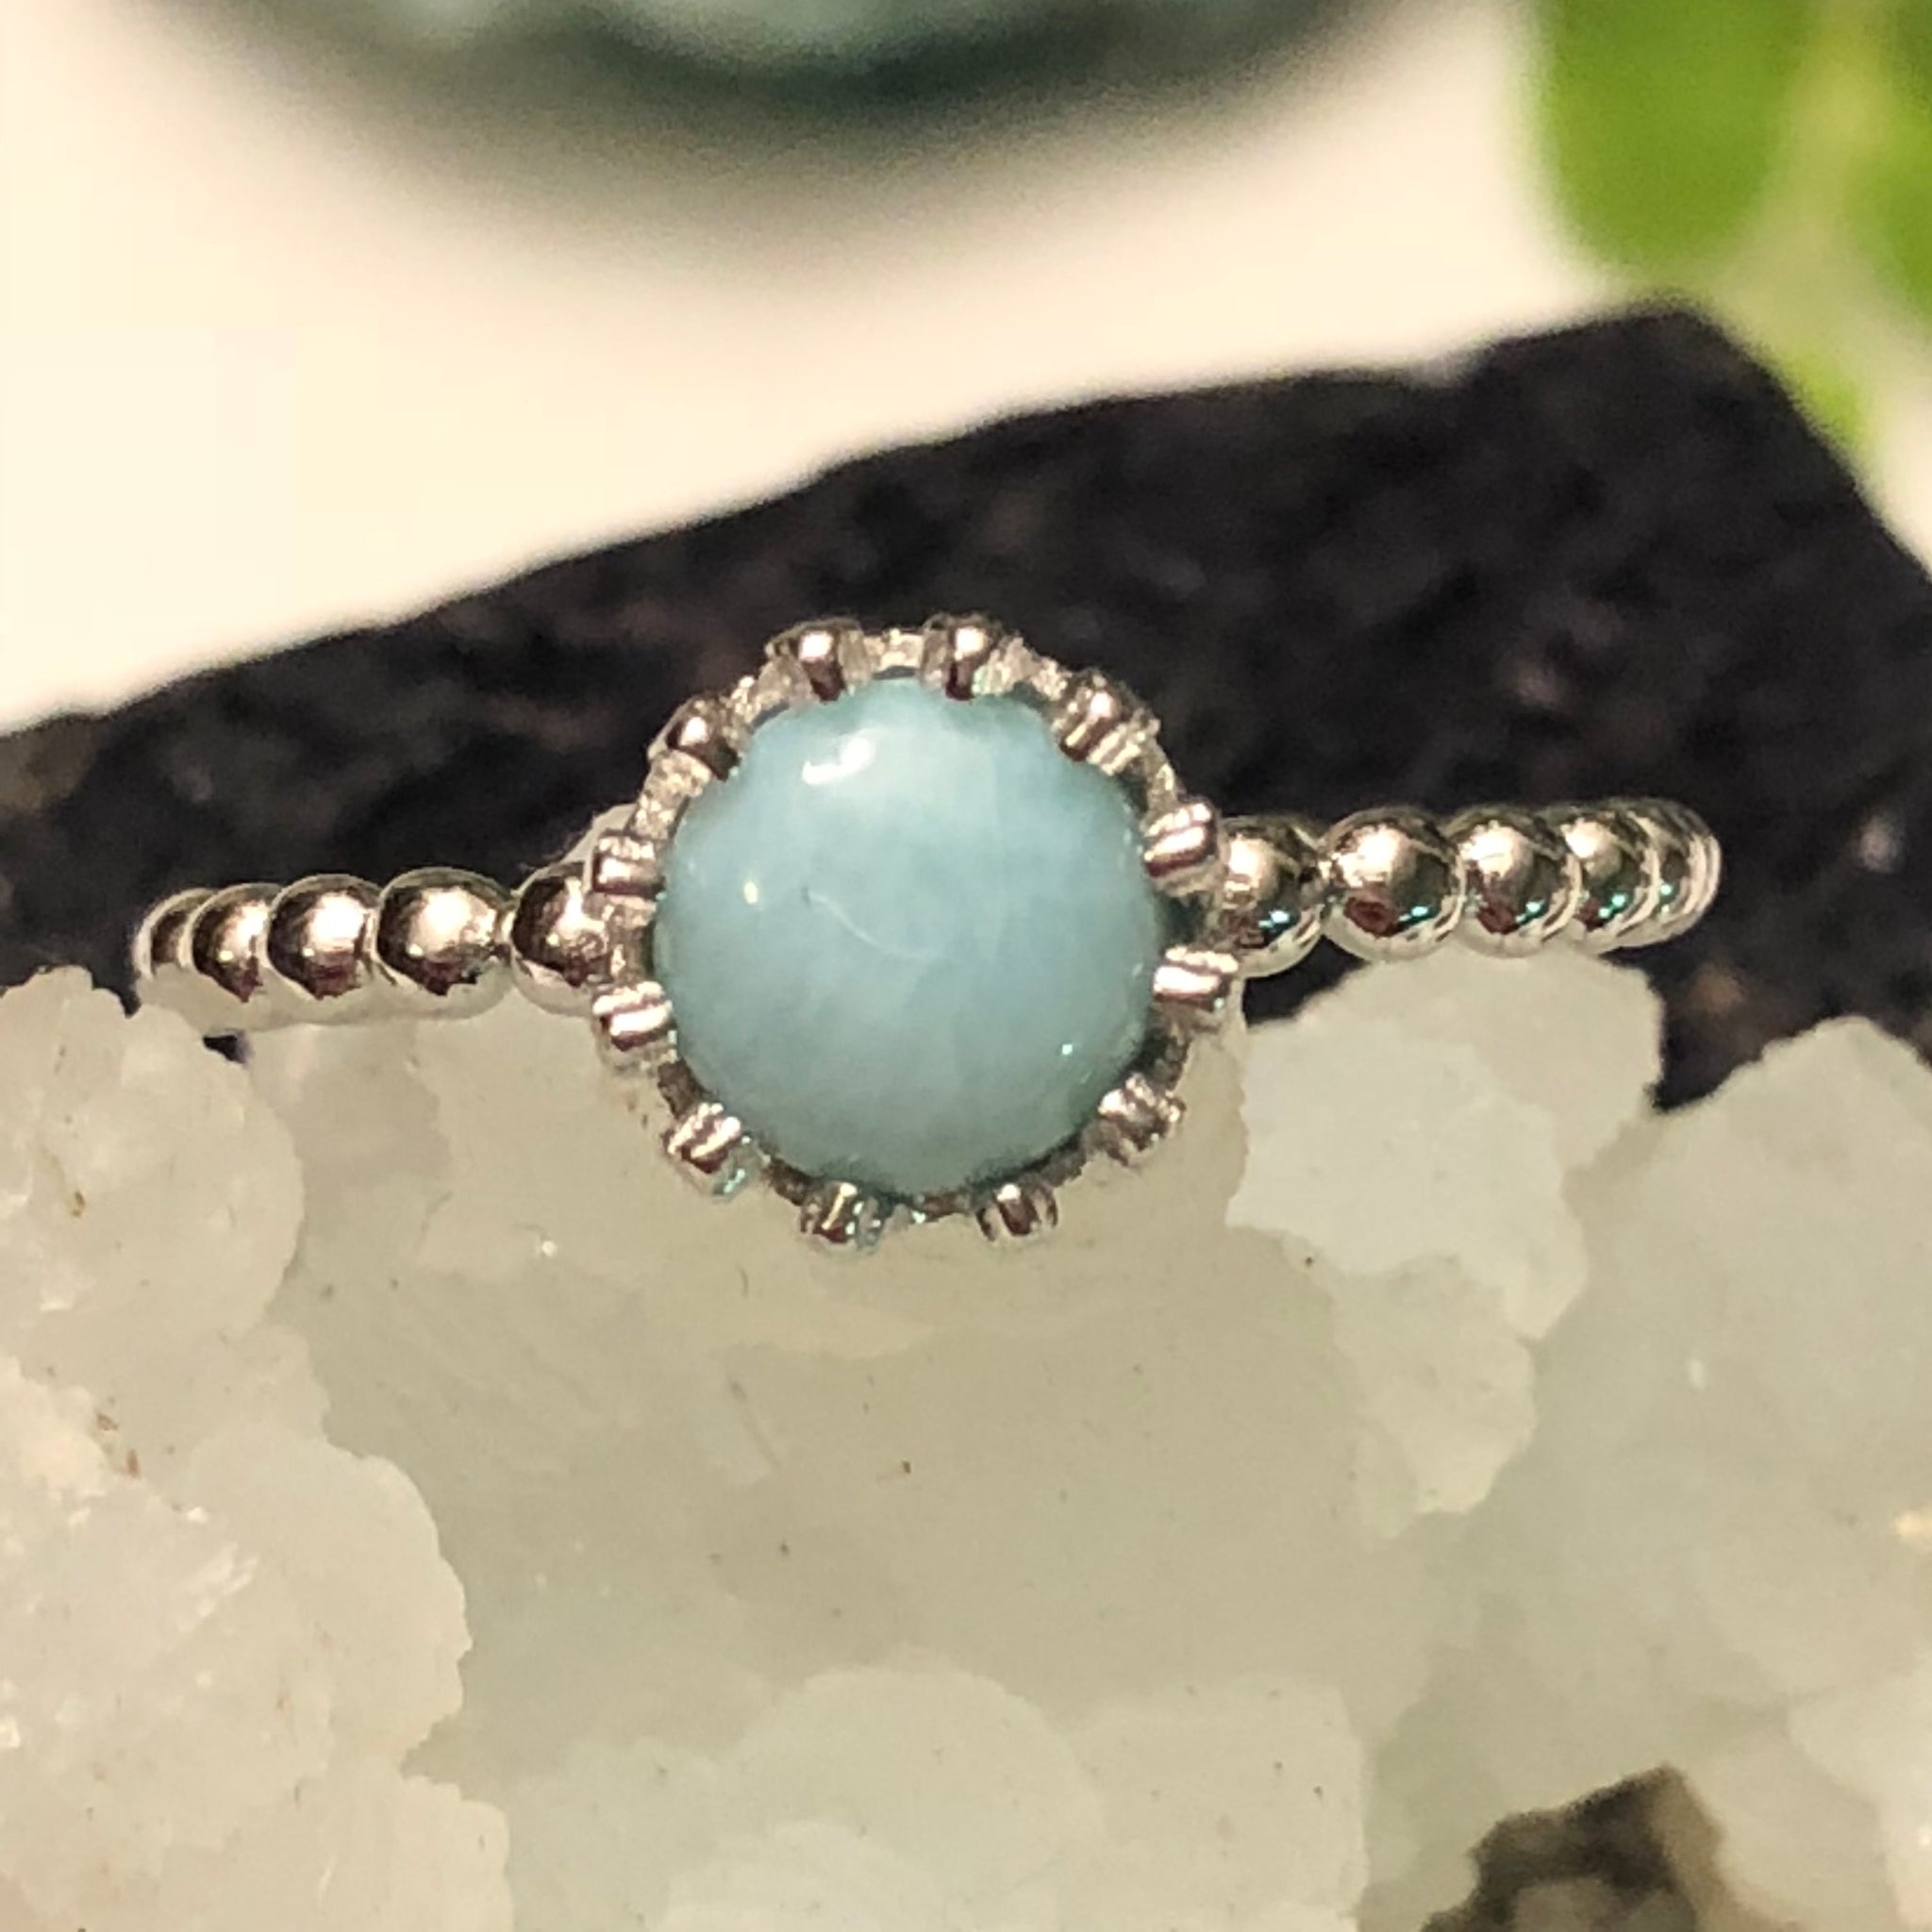 Larimar Ring + Sterling Silver Jewelry + FREE Gift Box + FREE Shipping  Codes - AlphaVariable